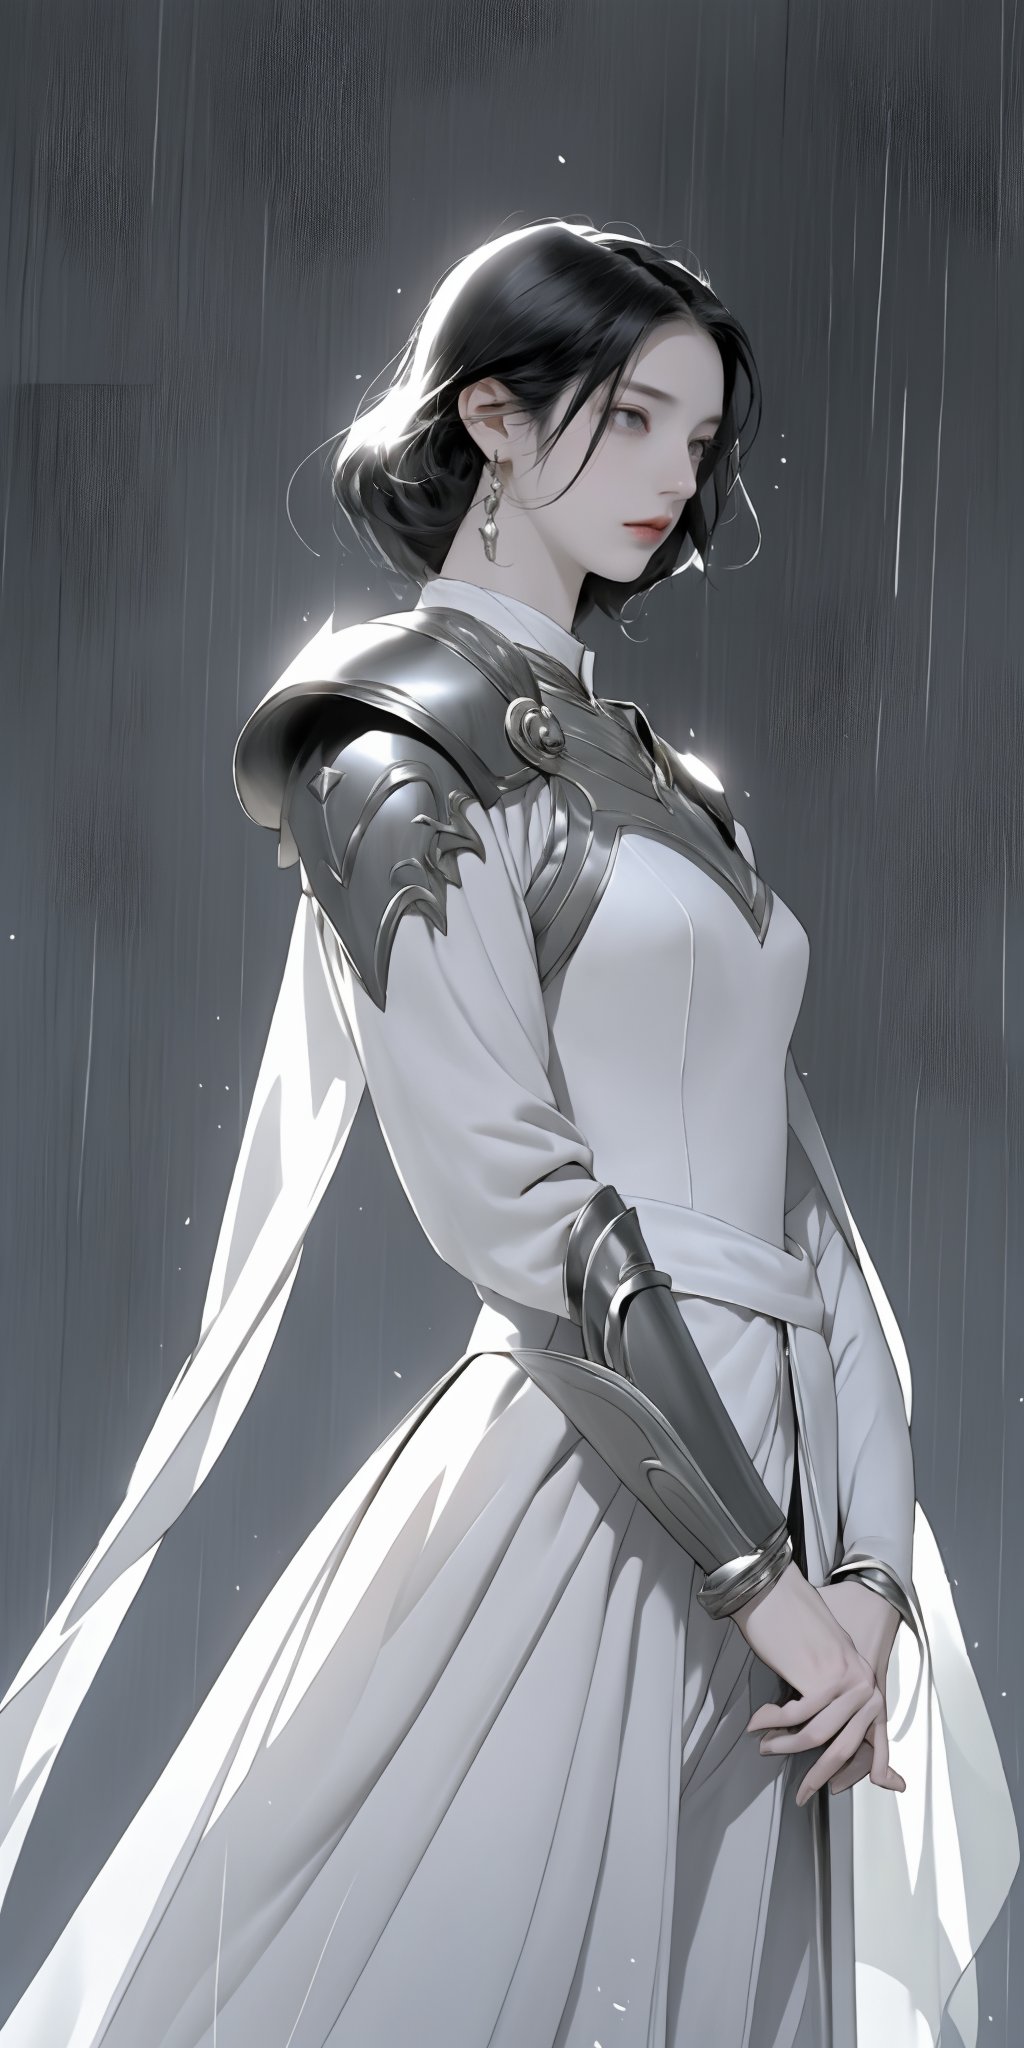 a beautiful woman, wearing armor, Saint Seiya style, holding the helmet, in her hands, white skin, short black hair, black eyes, the armor outlines her body